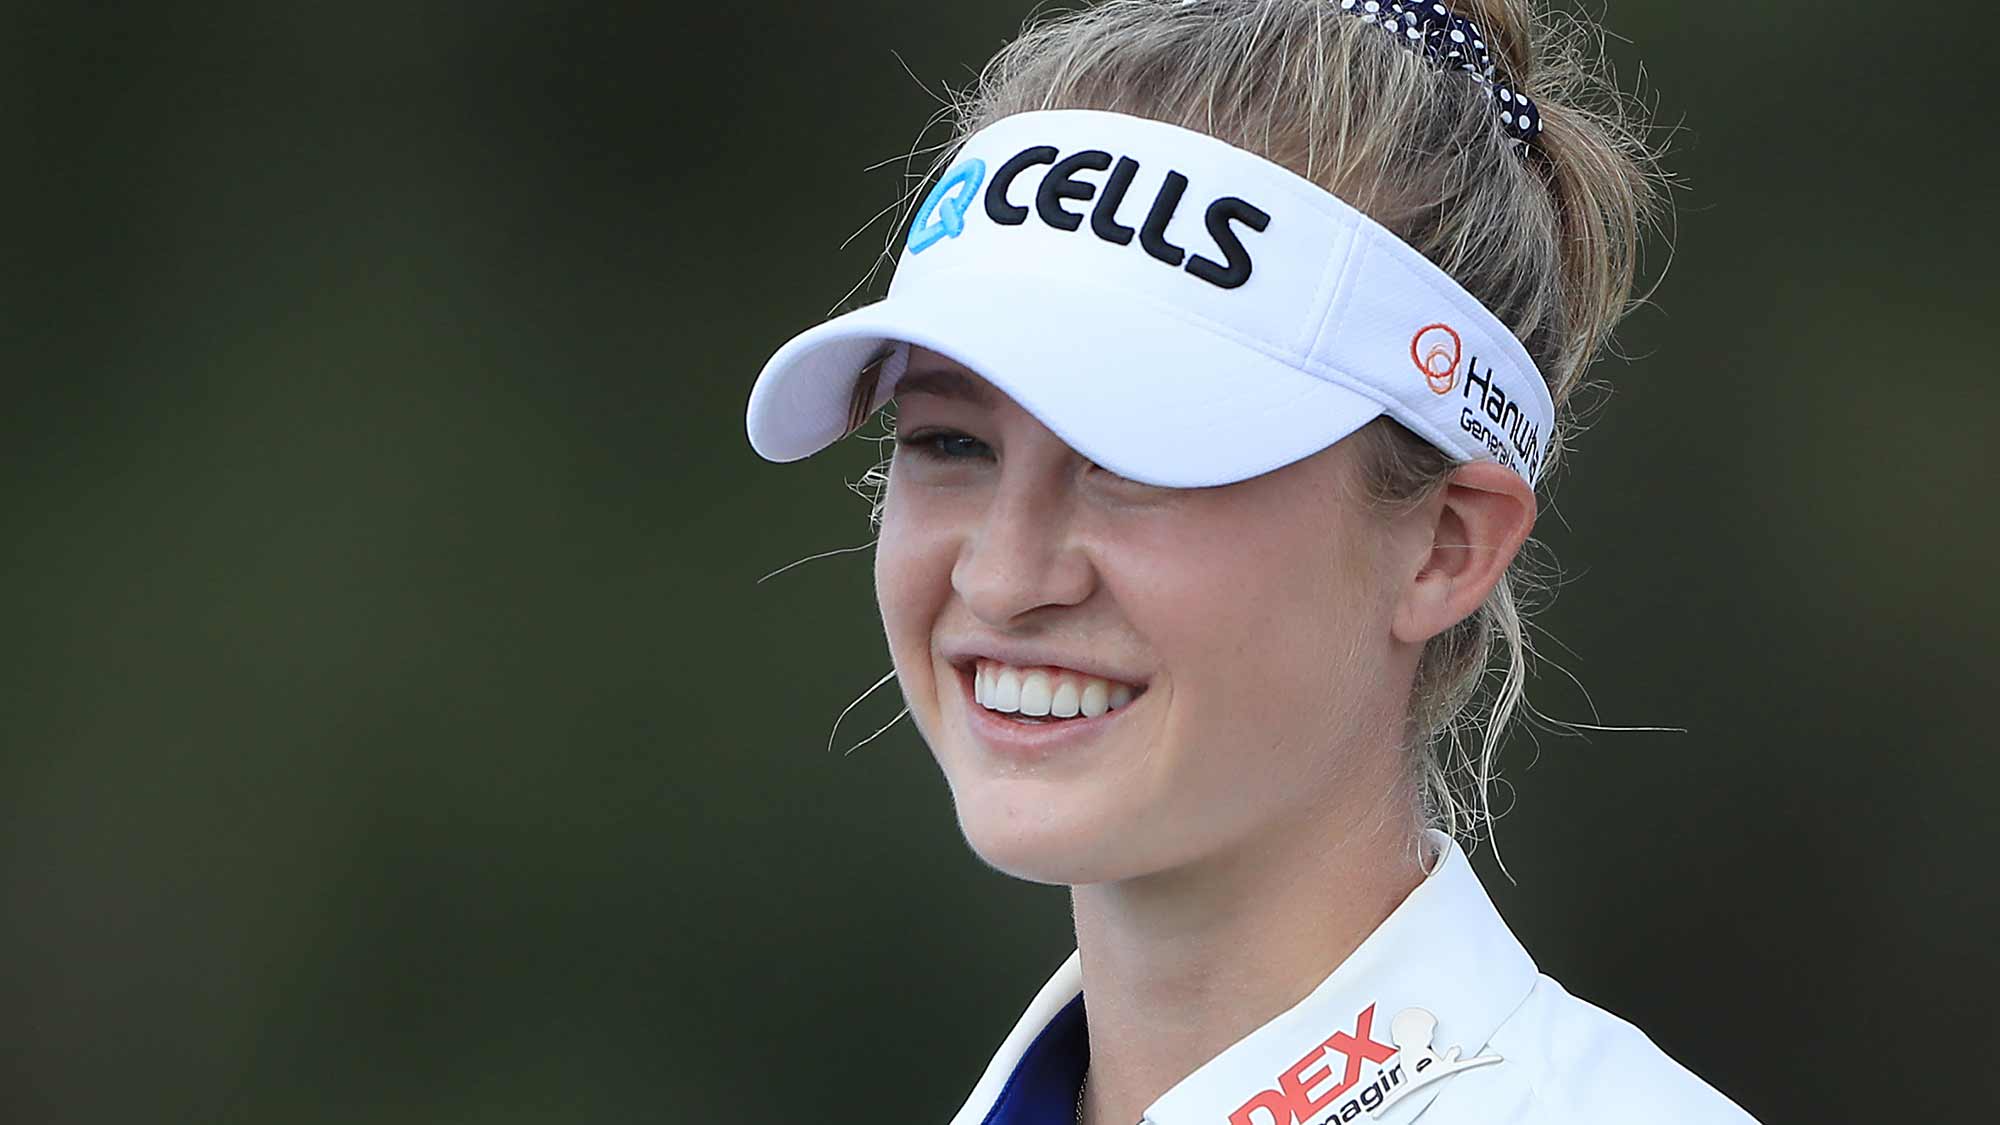 Nelly Korda of the United States waits on the ninth tee during the second round of the CME Group Tour Championship at Tiburon Golf Club on November 22, 2019 in Naples, Florida